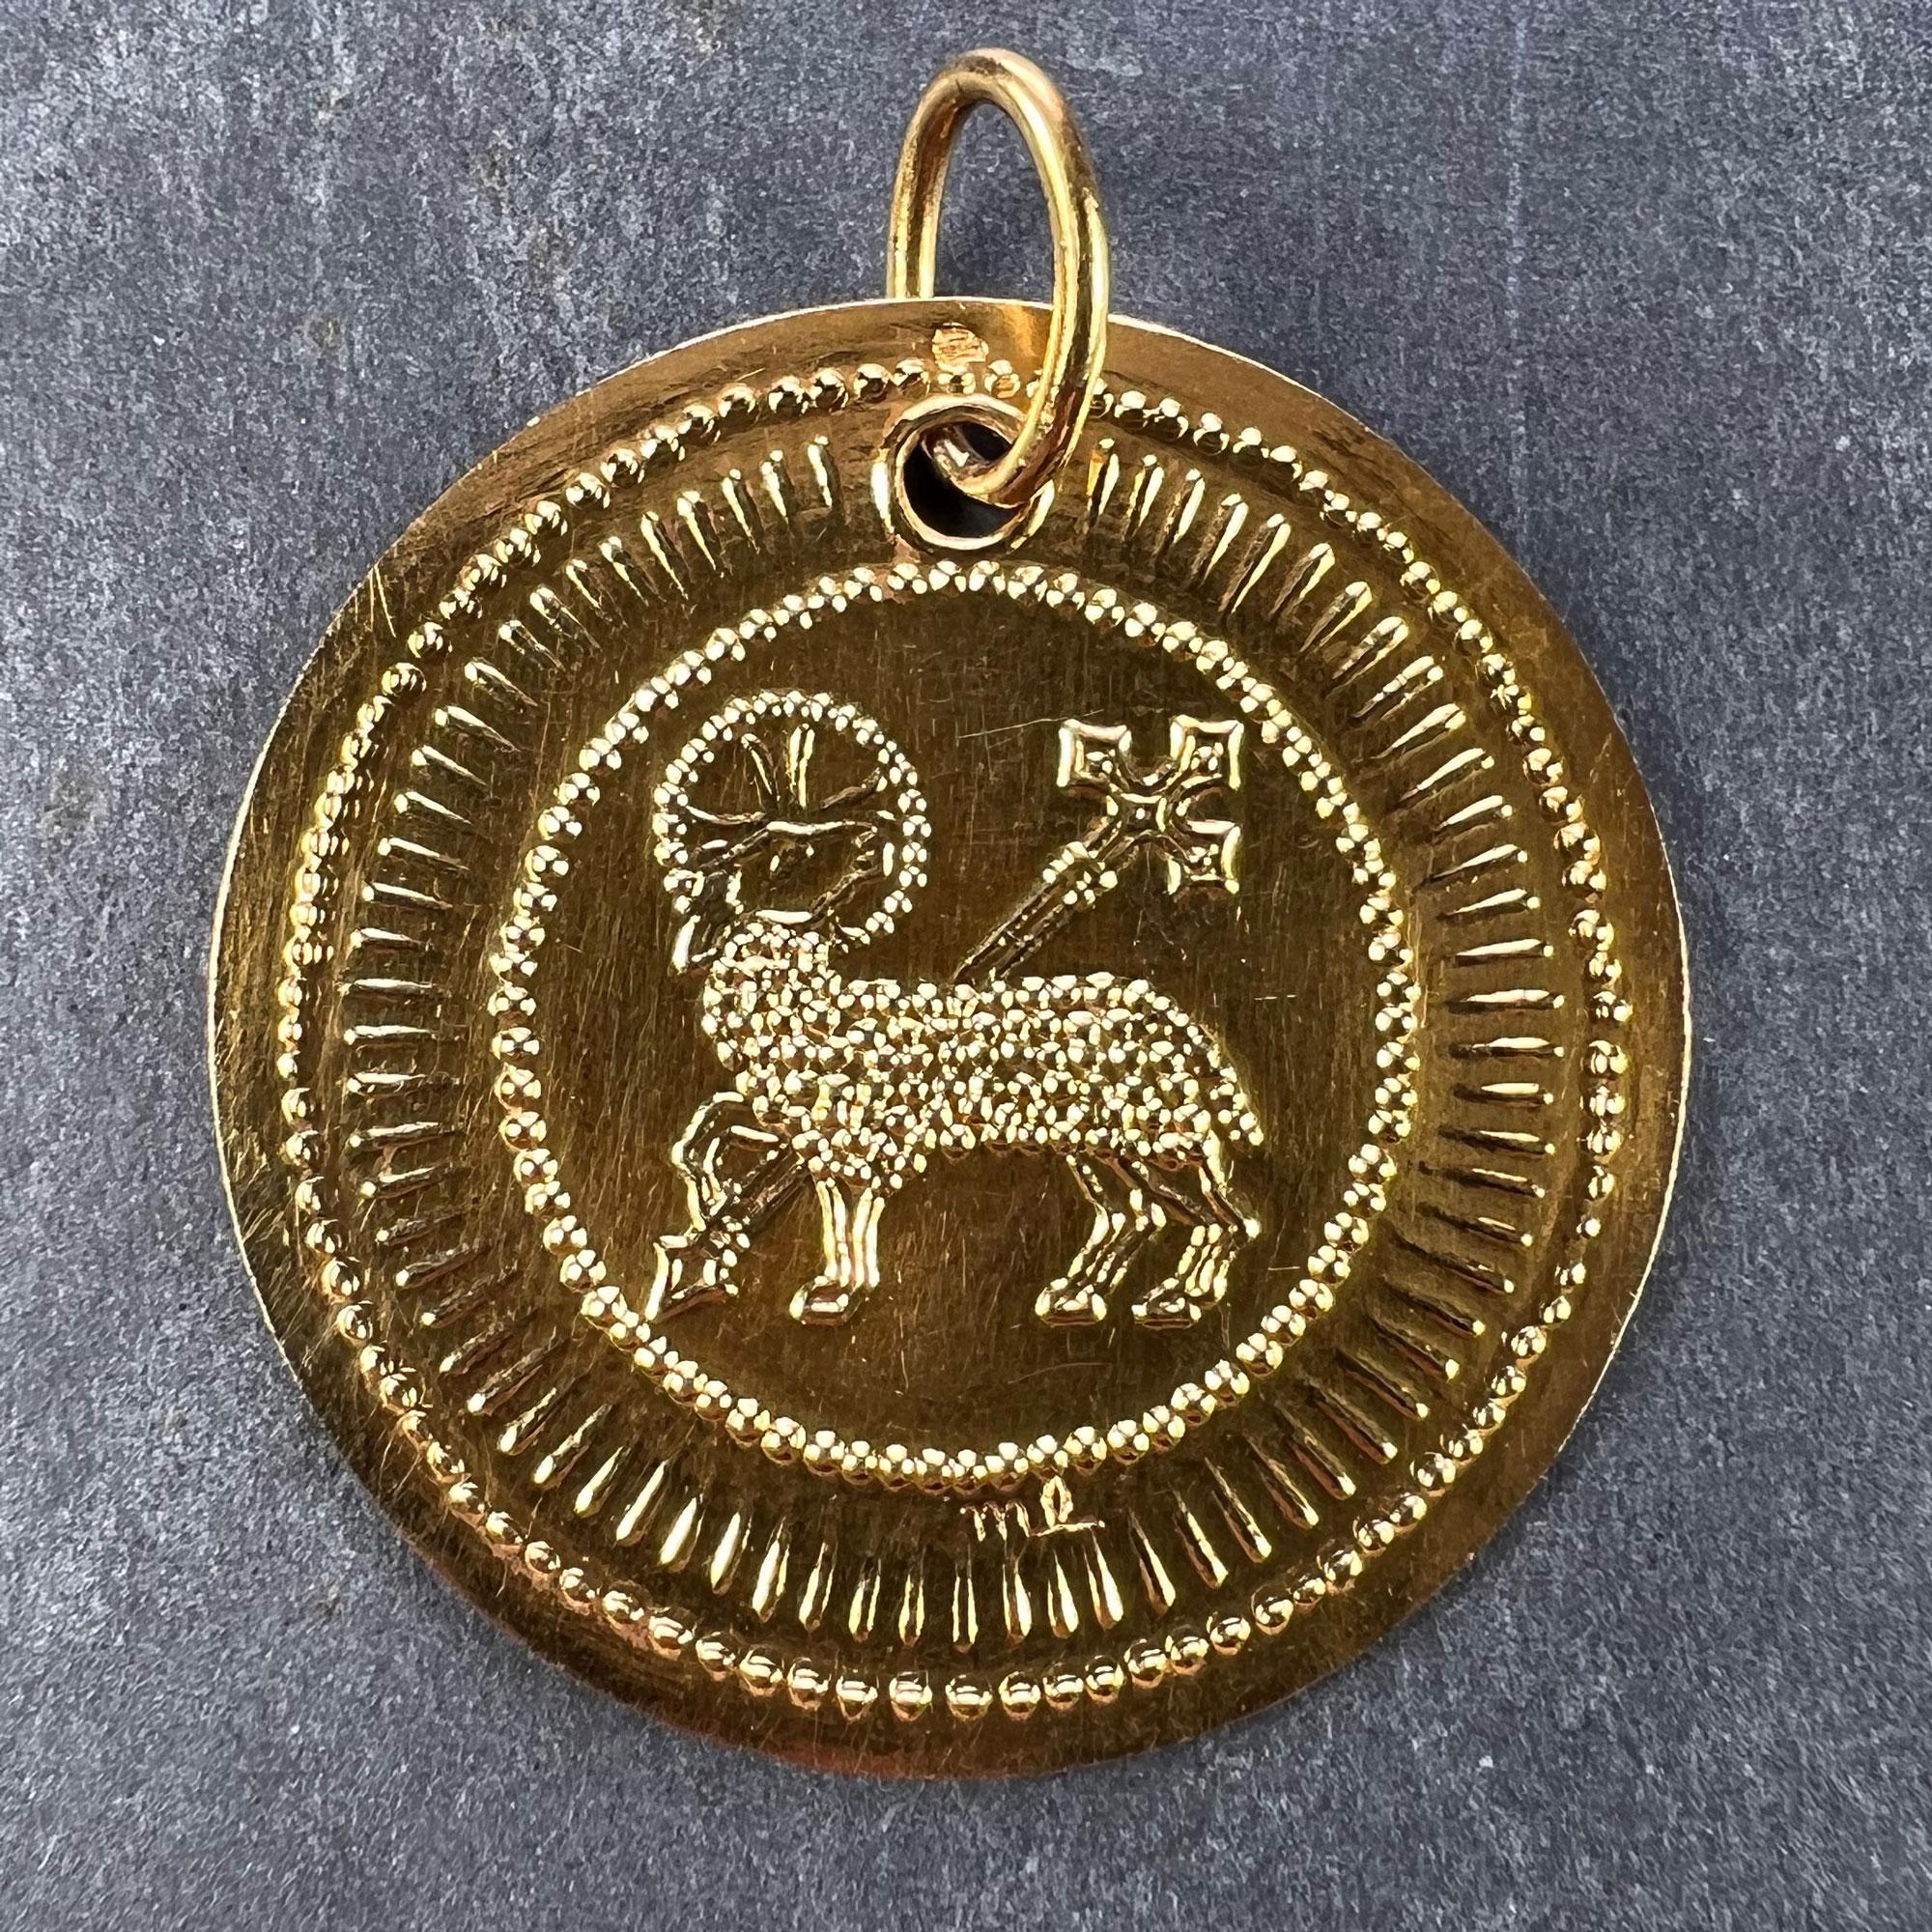 A French 18 karat (18K) yellow gold pendant designed as a round medal with a depiction of the Lamb of God with a sceptre surmounted by a cross to the centre surrounded by a radiant design of dots and lines. Stamped with the eagle's head for French